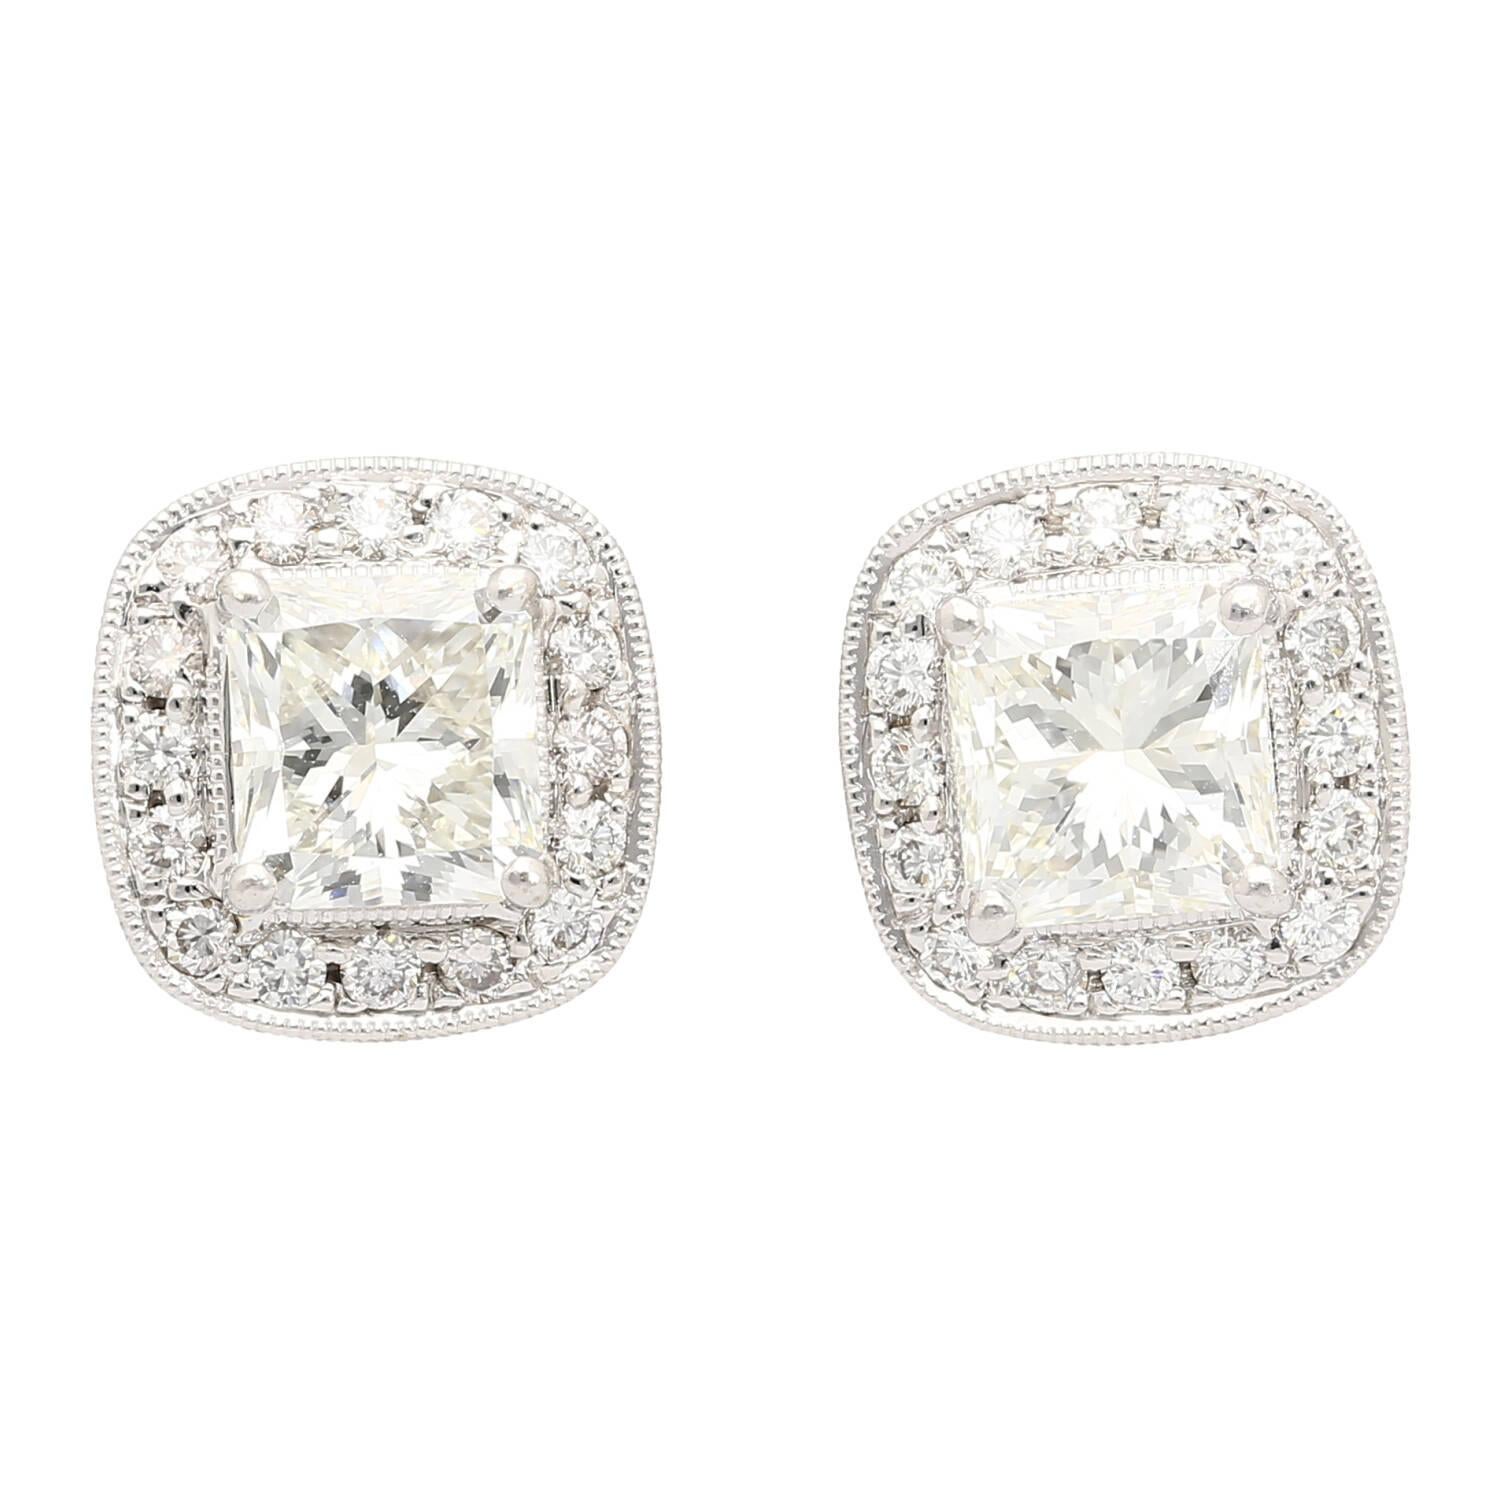 GIA Certified 3 Carat Total Radiant Cut Diamond Stud Earrings in 18k White Gold For Sale 2